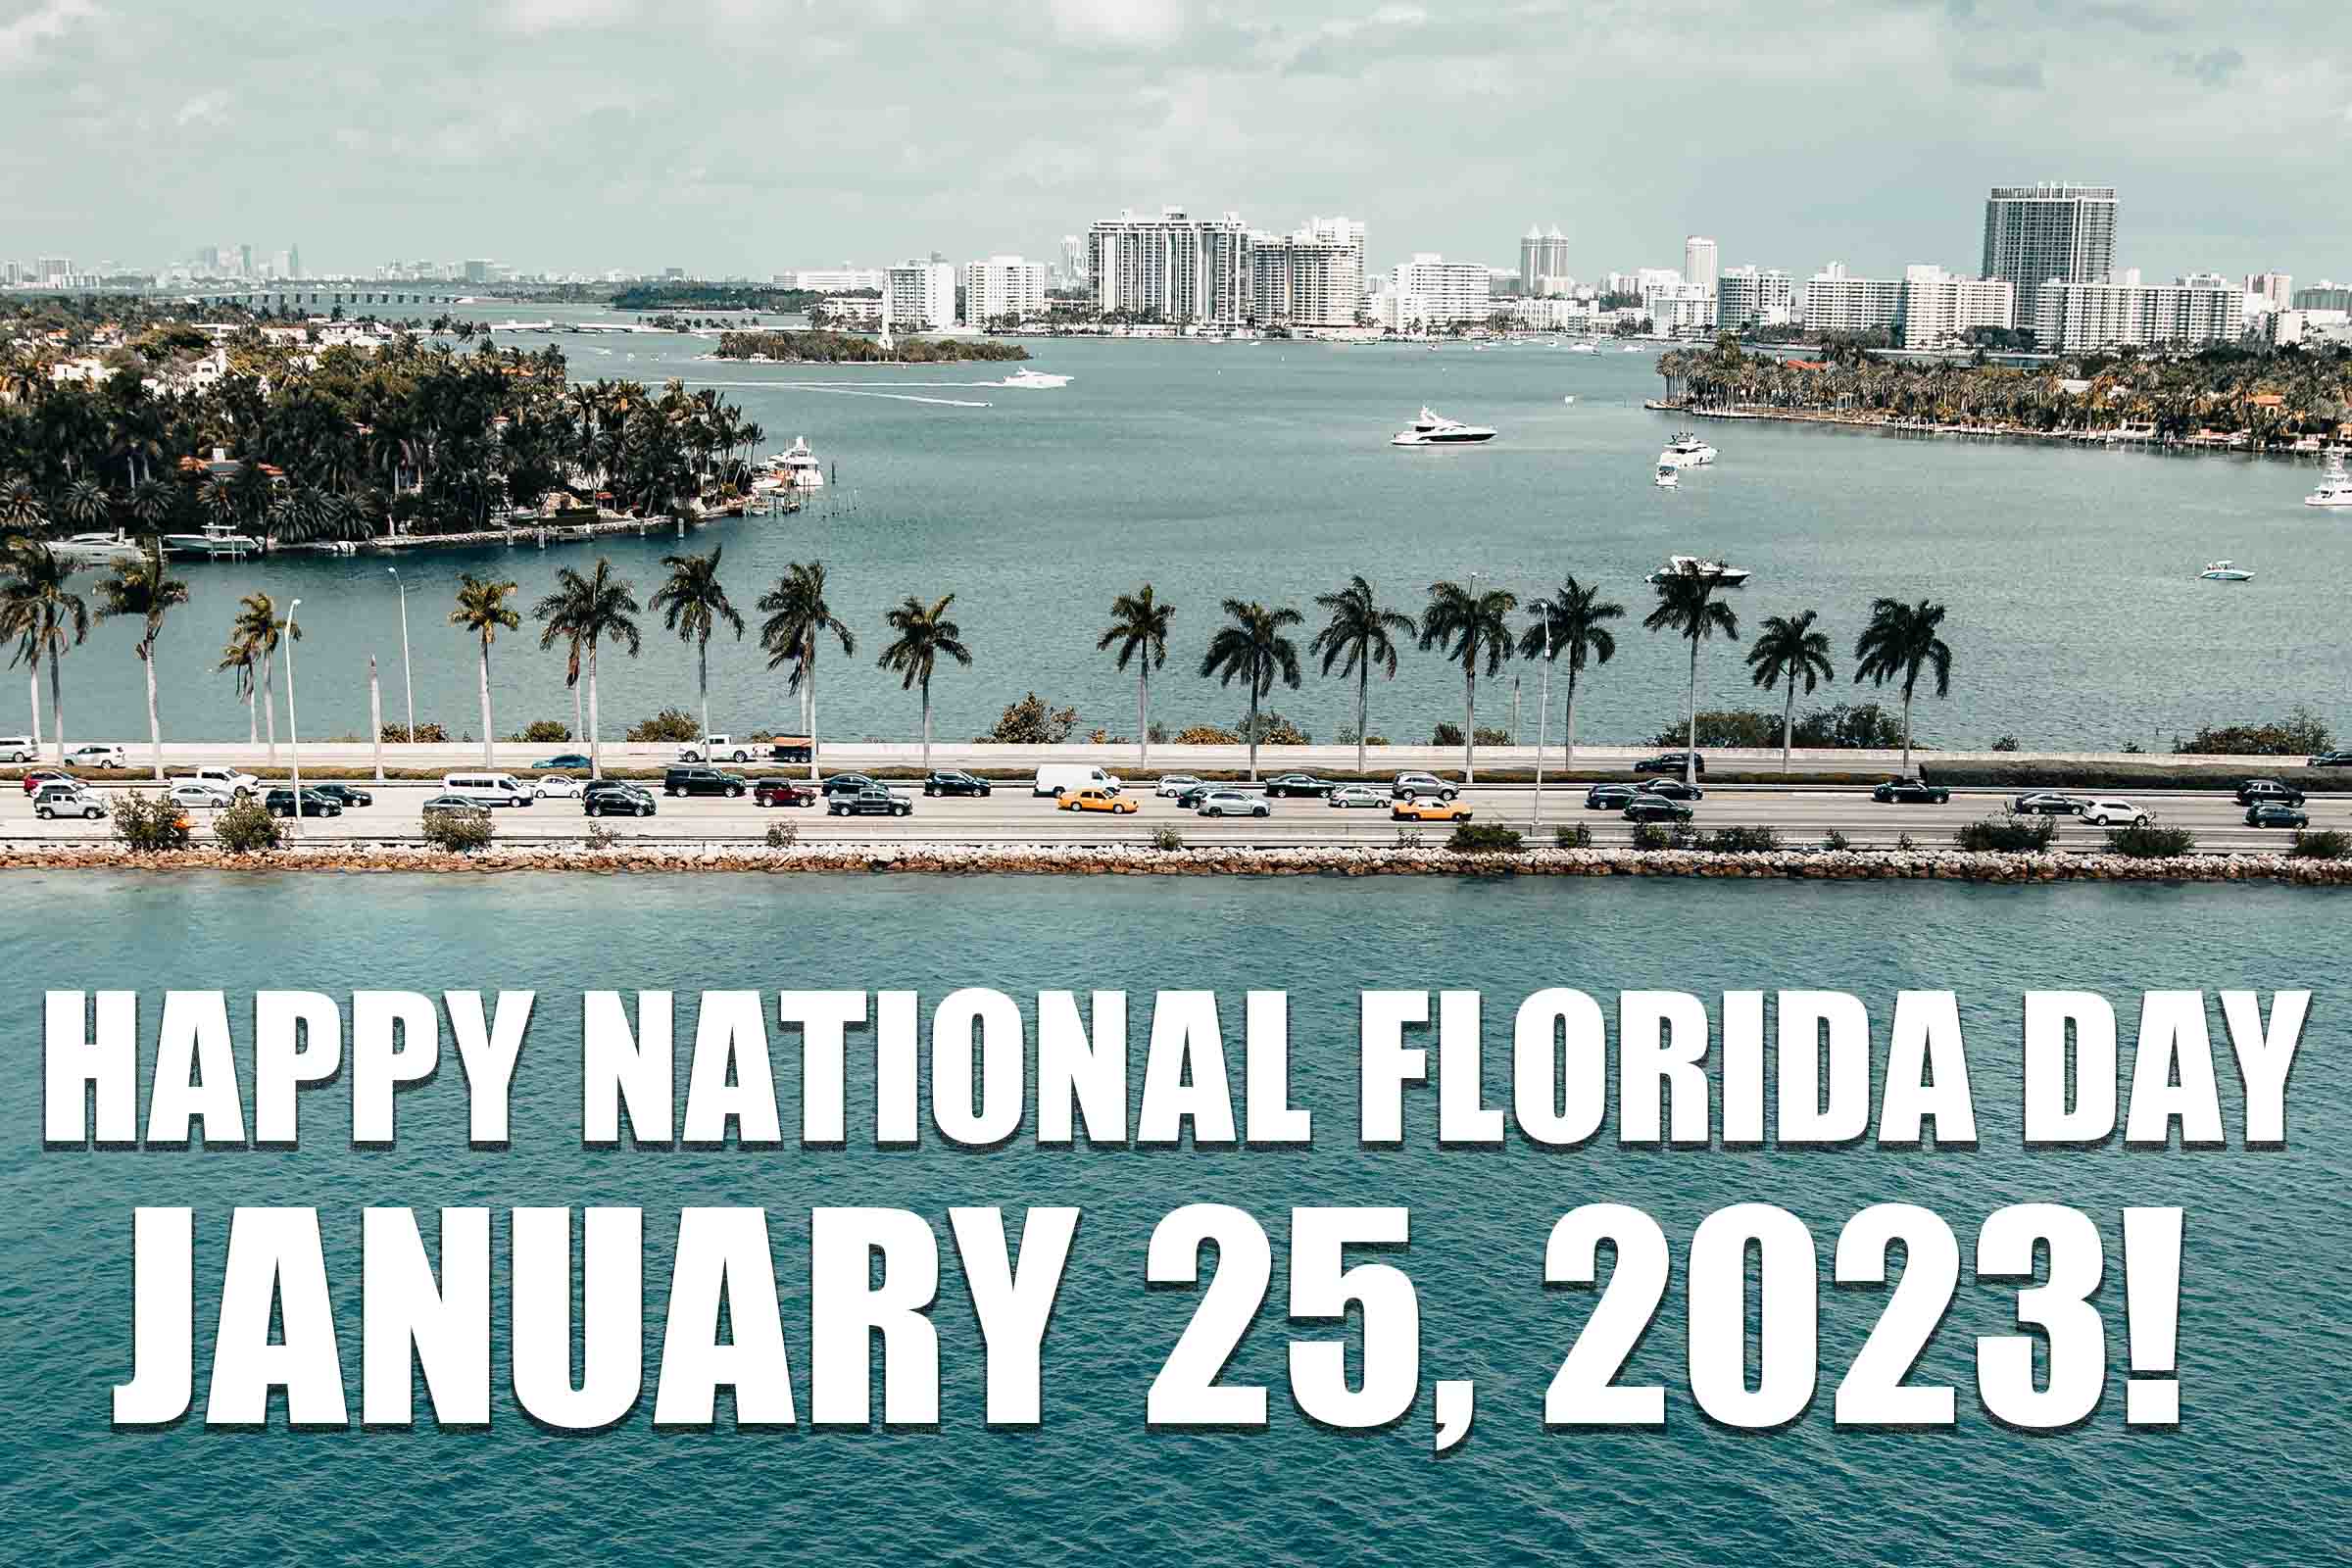 In Honor Of National Florida Day, We Asked Floridians Why They Love It Here